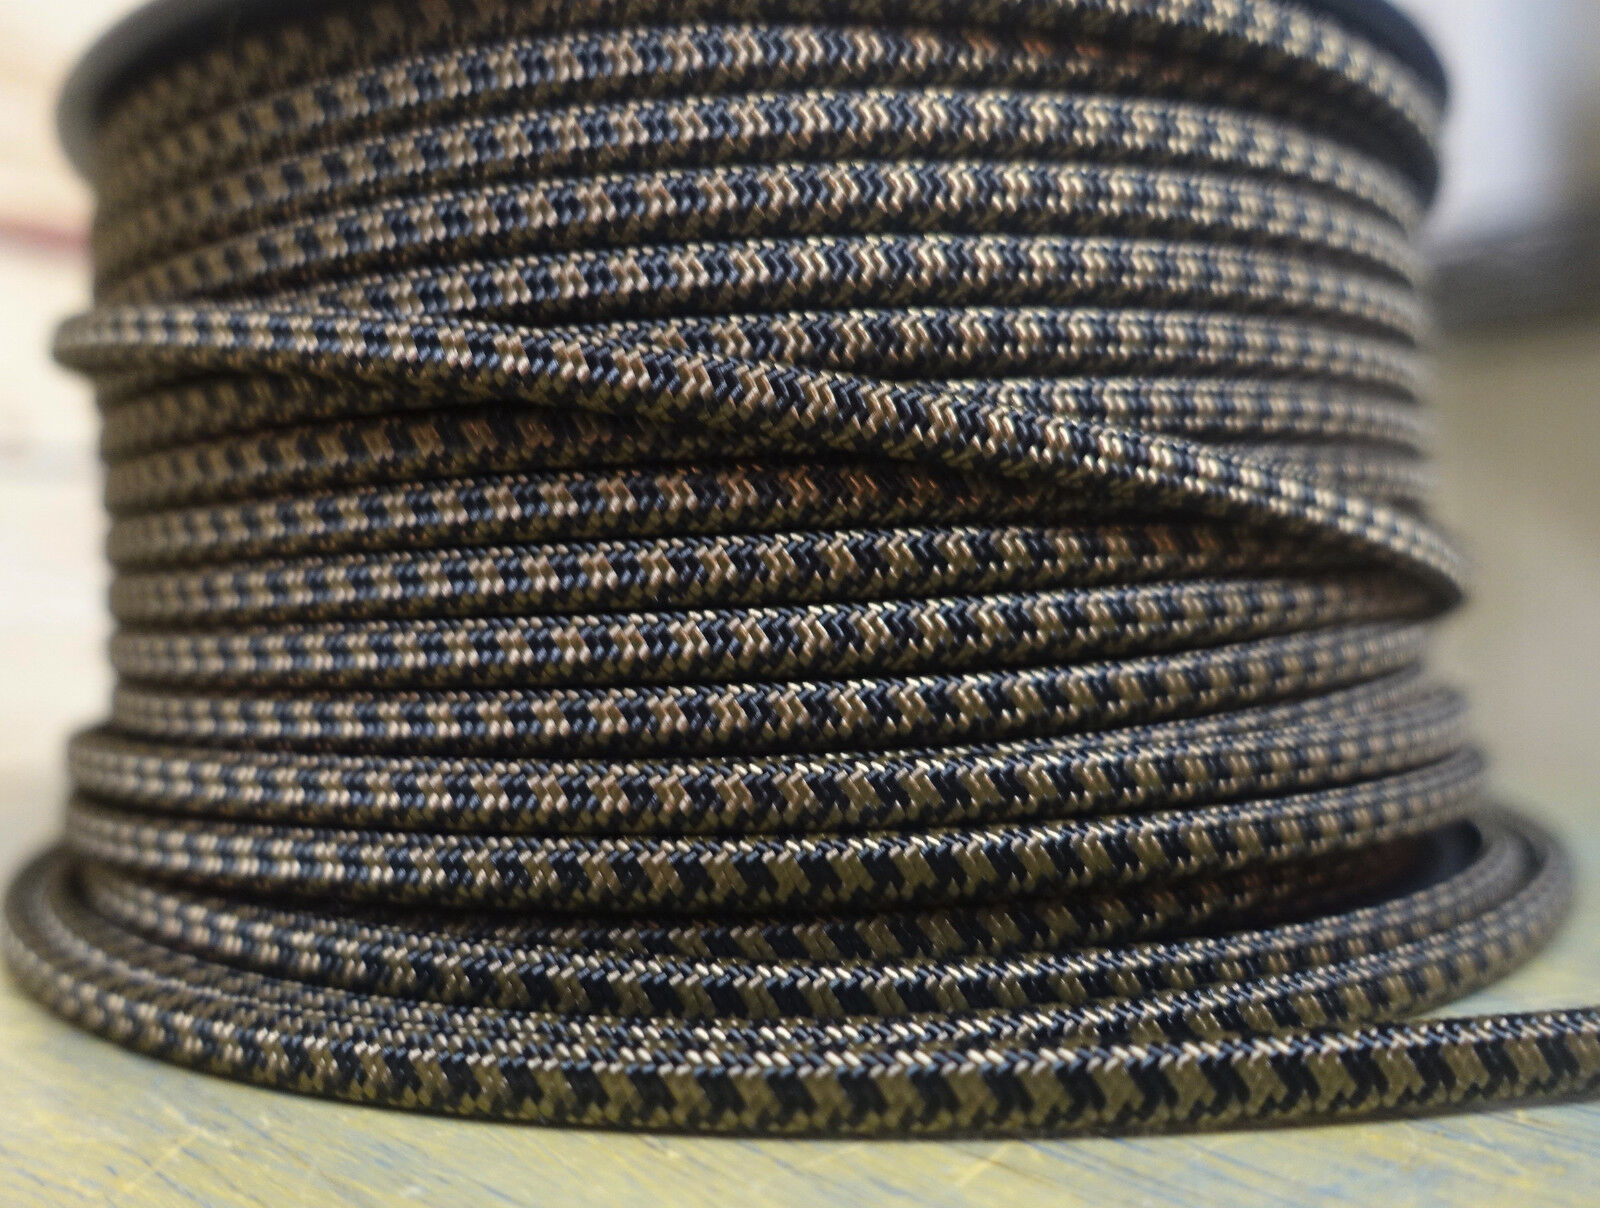 Black/Brown 2-Wire Flat Cloth Covered Cord, Fabric 18ga Vintage Style Lamps, USA